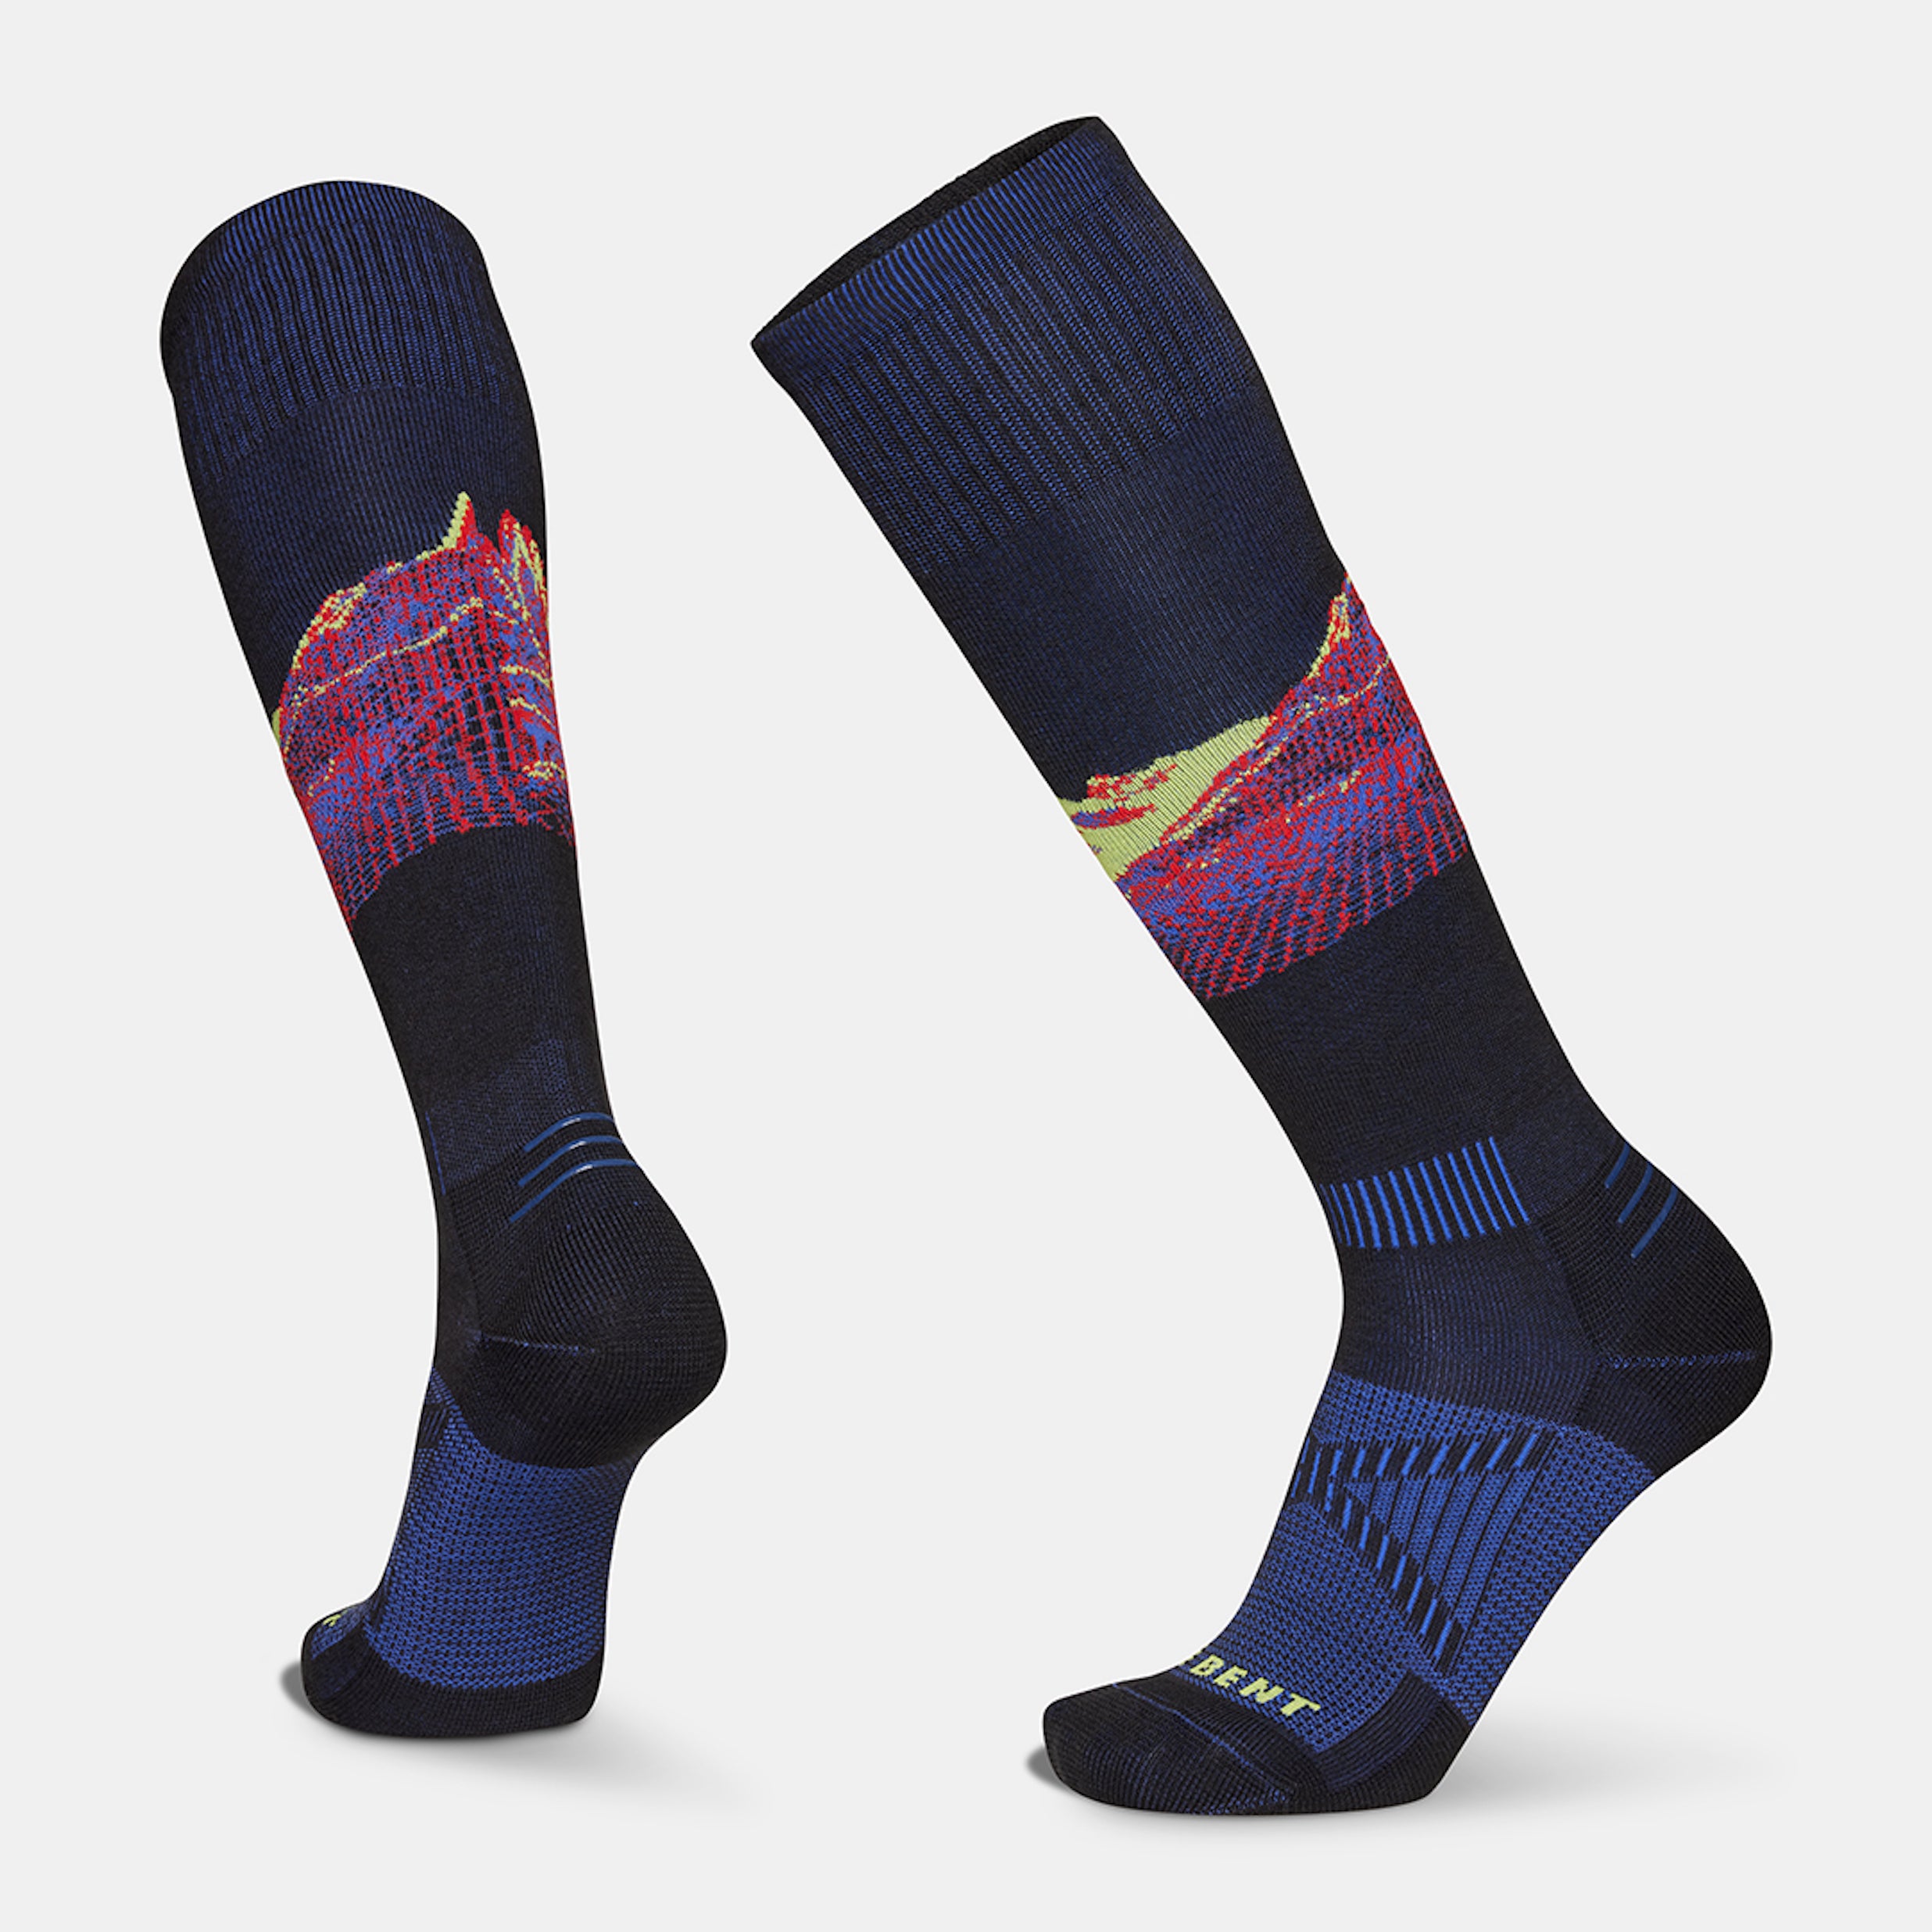 Black LeBent Men's ski socks with red and yellow mountain graphics, blue fibers throughout.